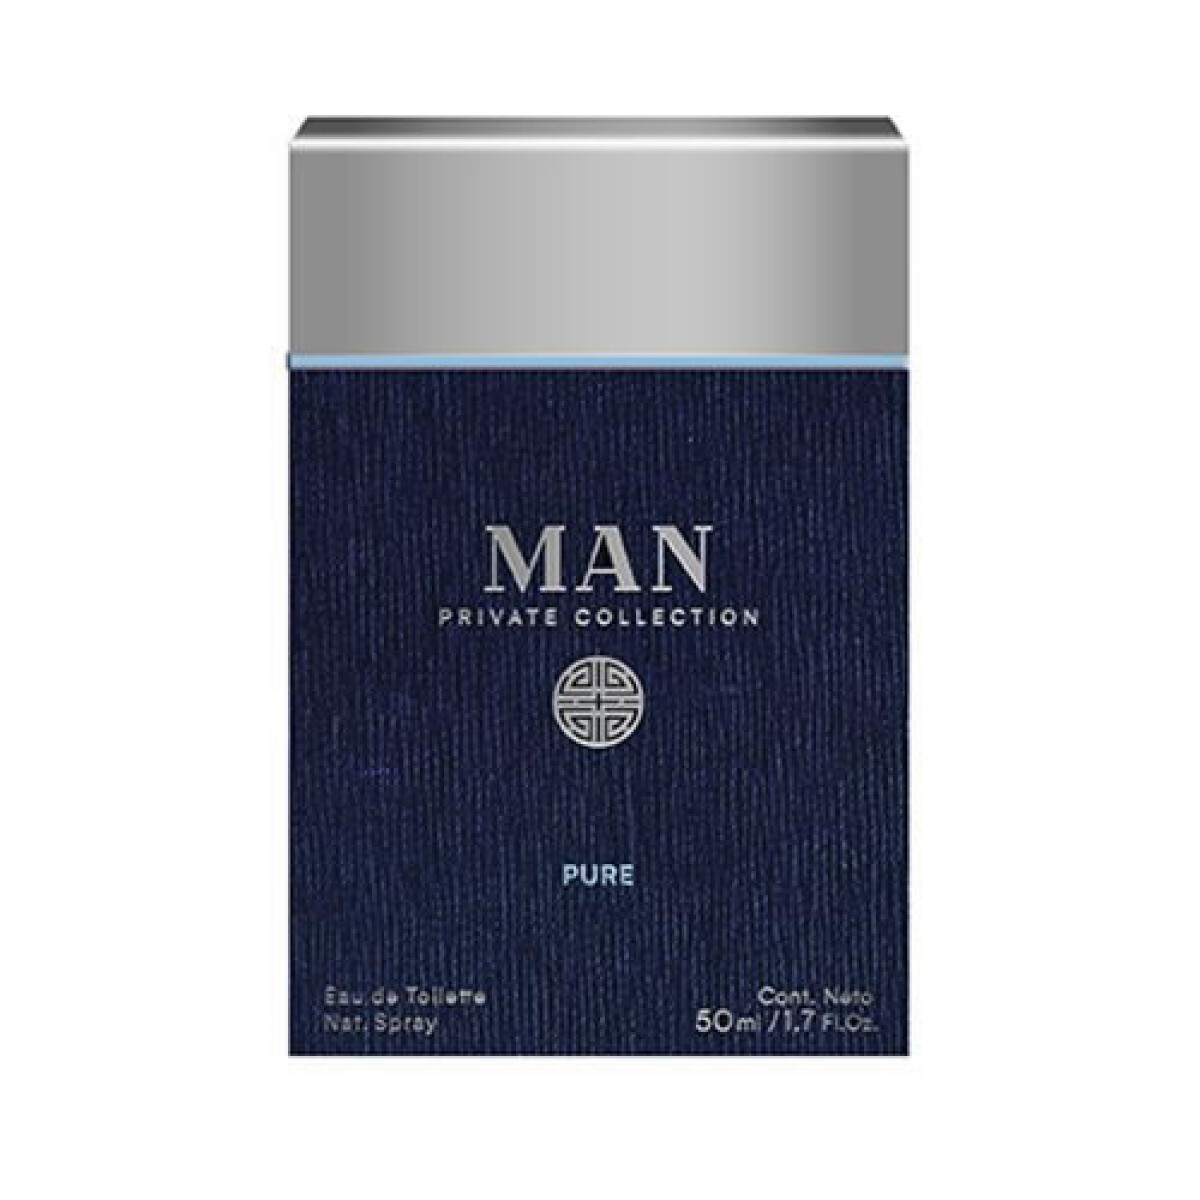 FRAGANCIA MAN PRIVATE COLLECTION PURE NATURAL EDT 50 ML 